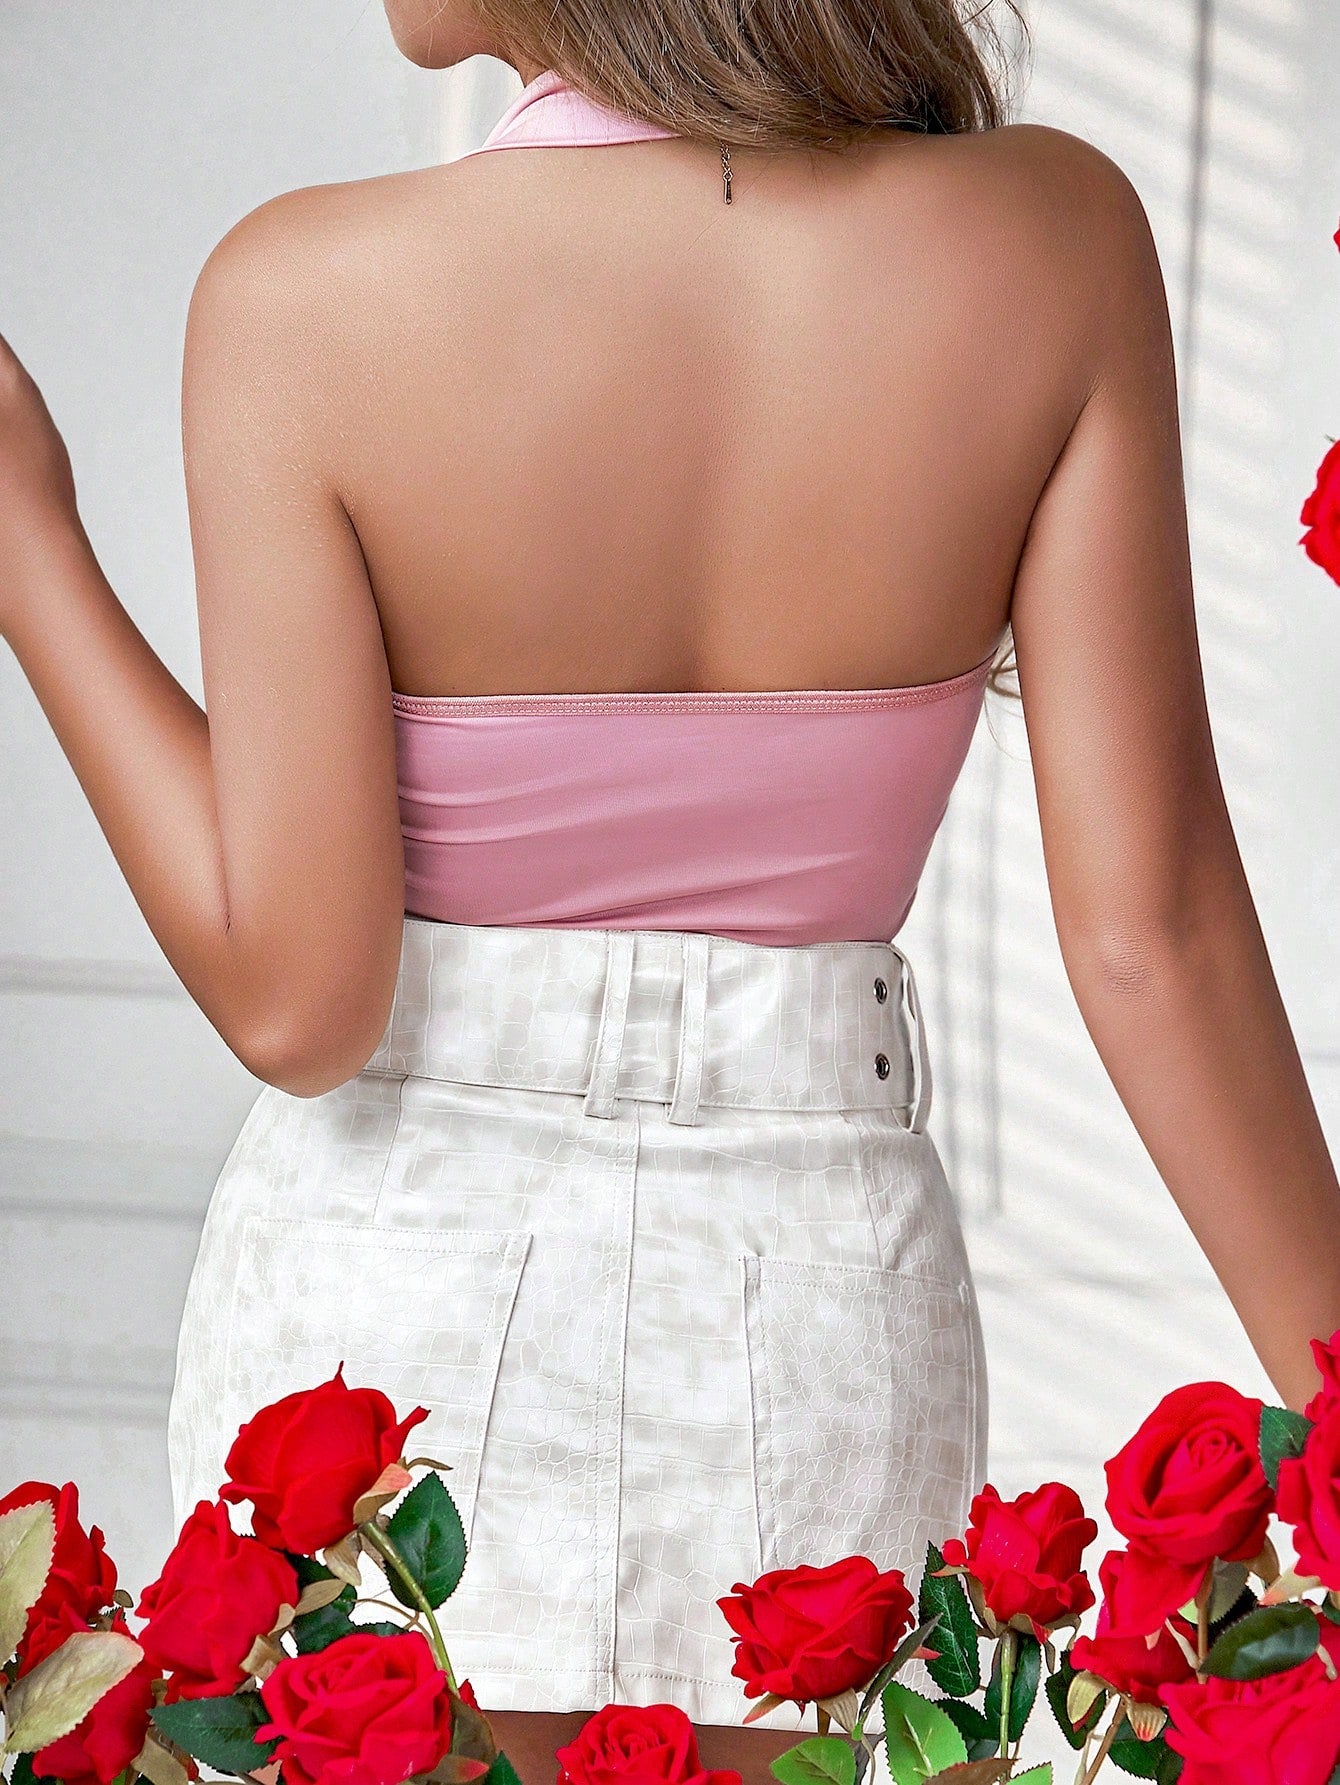 Barbie Pink Bodysuit paired with a white skirt, from behind